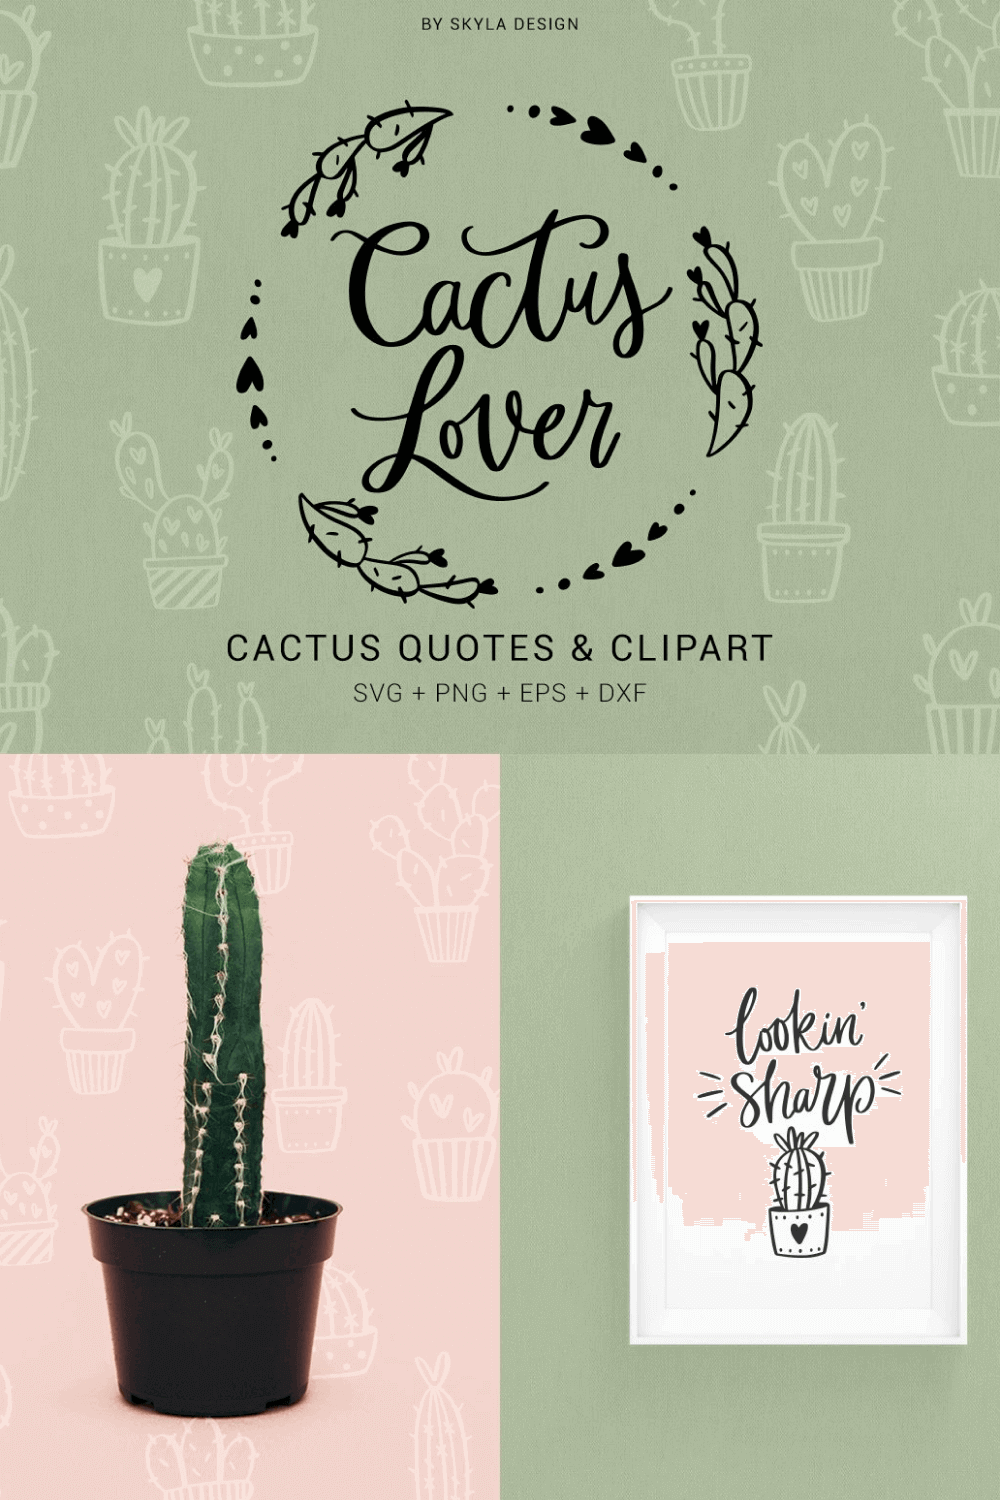 Looking Sharp of Cactus Lover.